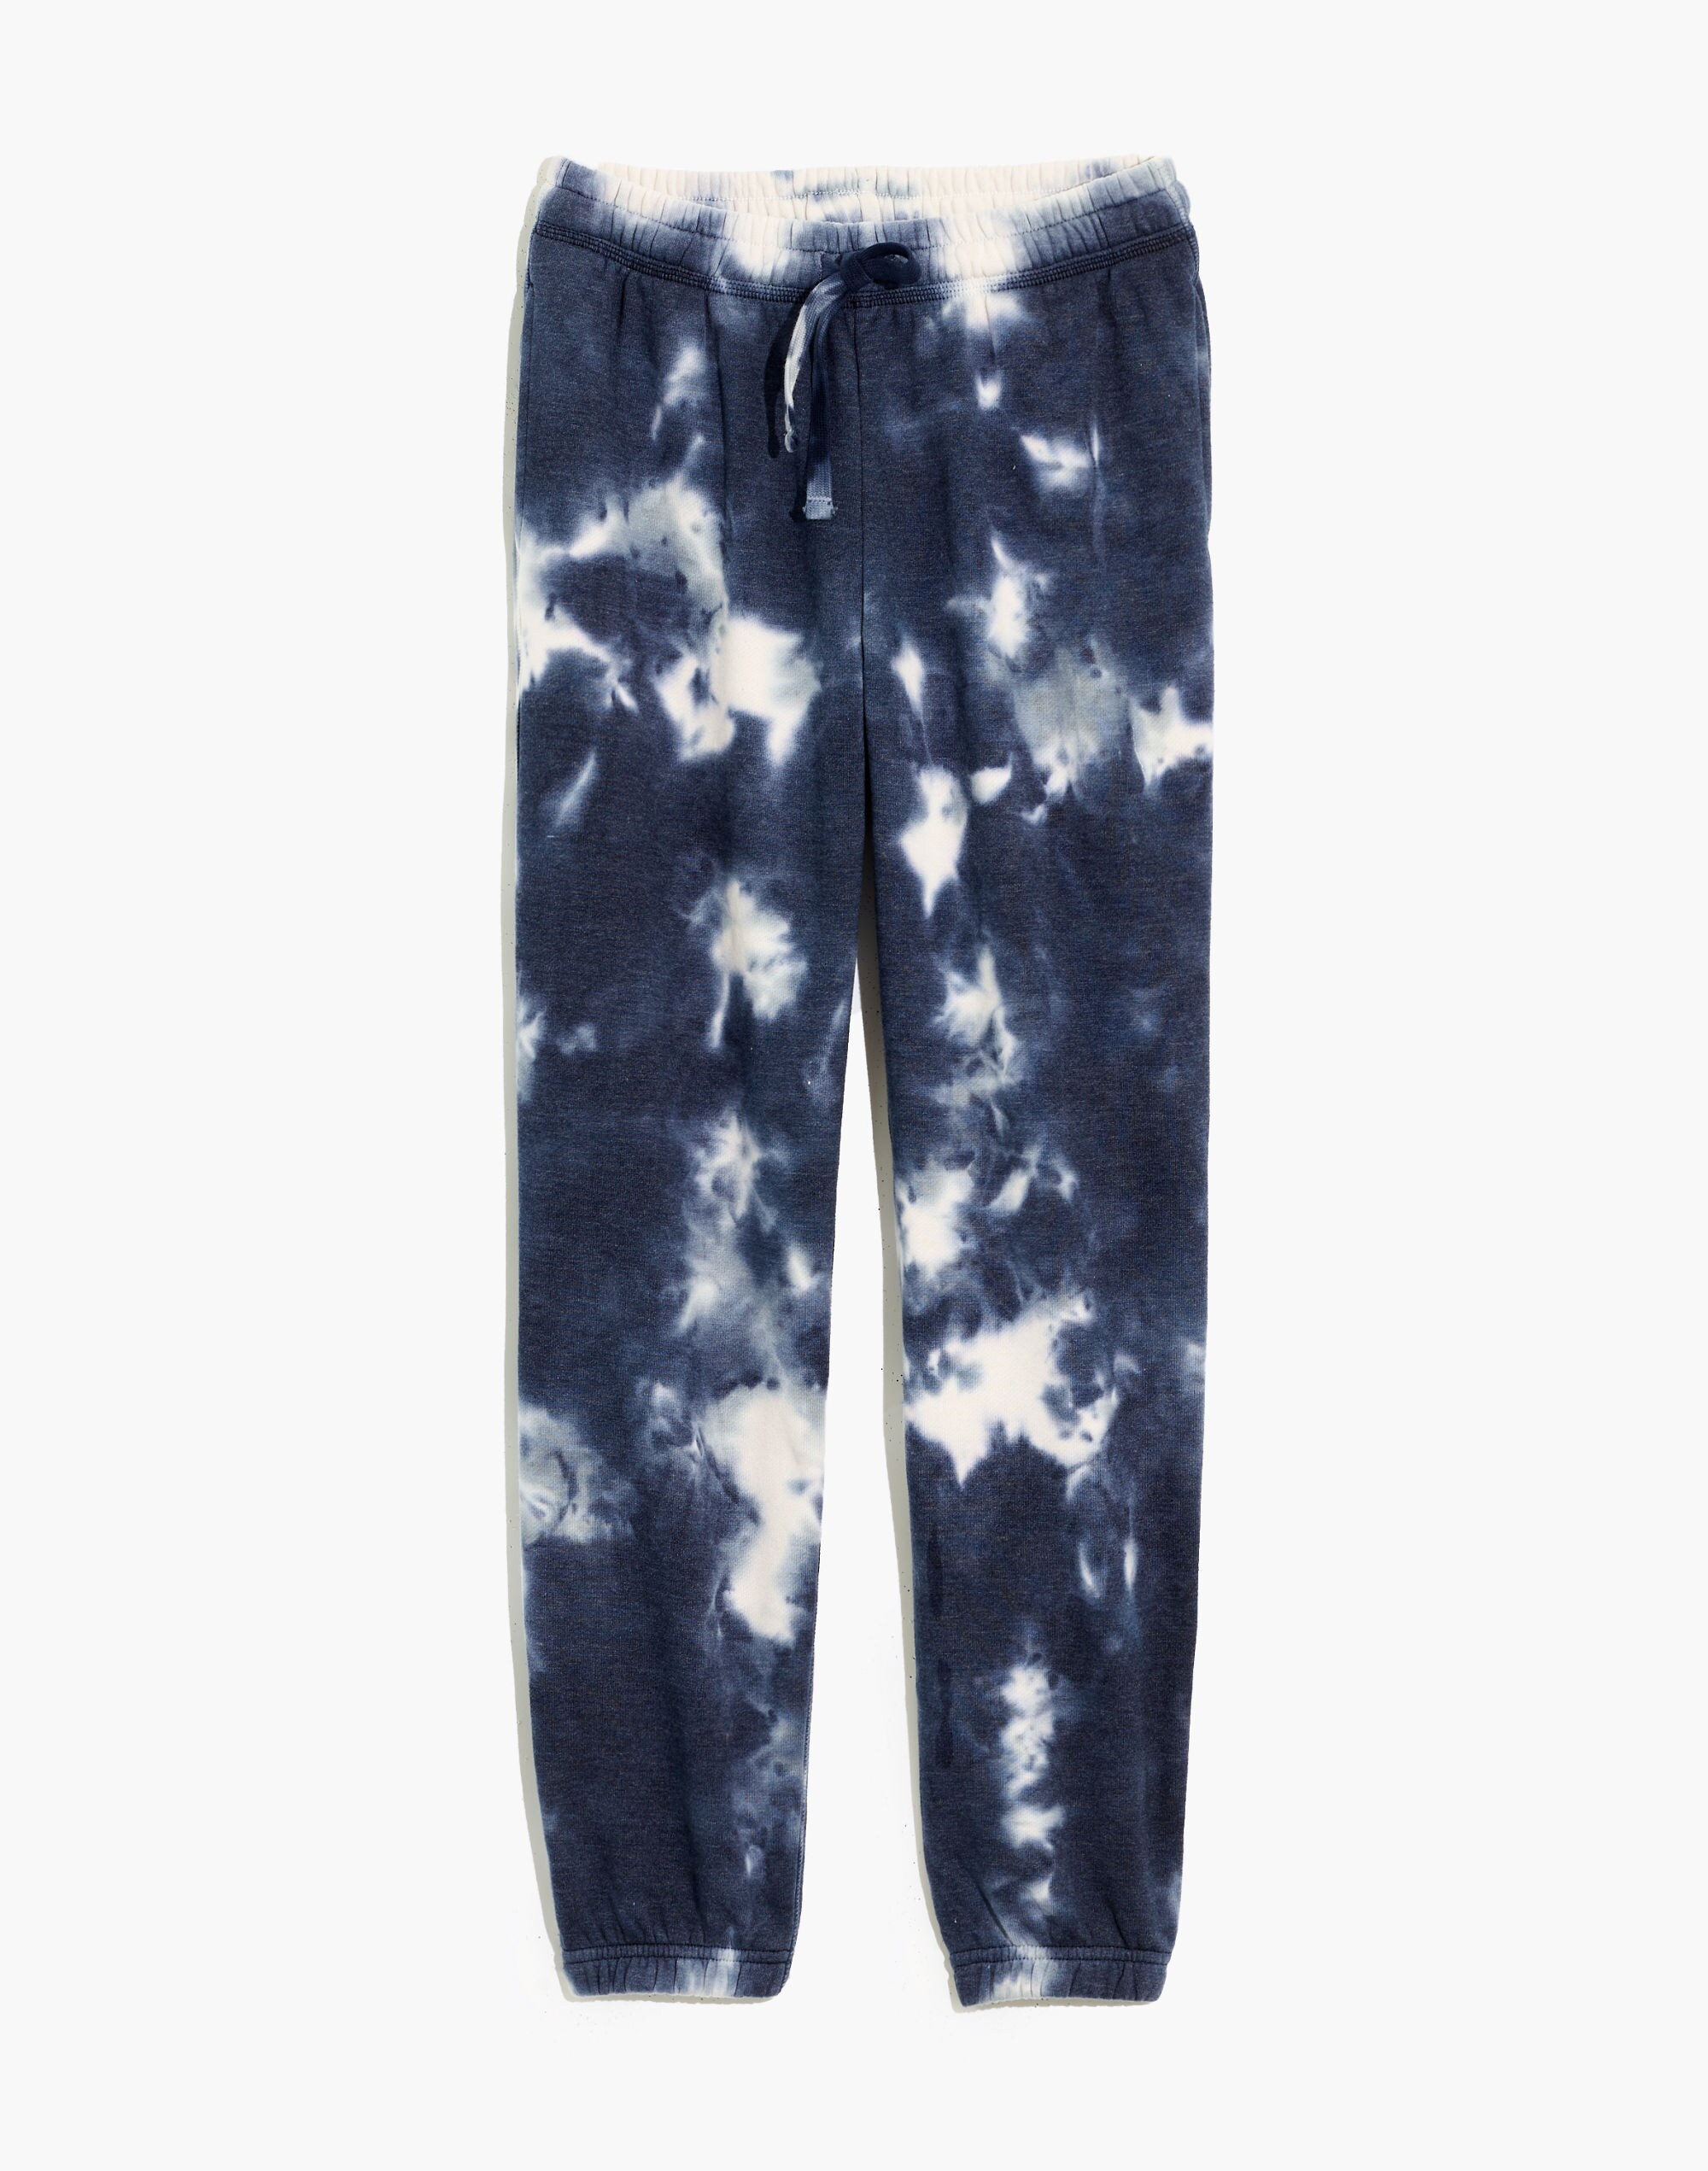 Richer Poorer Recycled Fleece Sweatpant Blue Mirage Tie Dye 04WBF-RCPT -  Free Shipping at Largo Drive